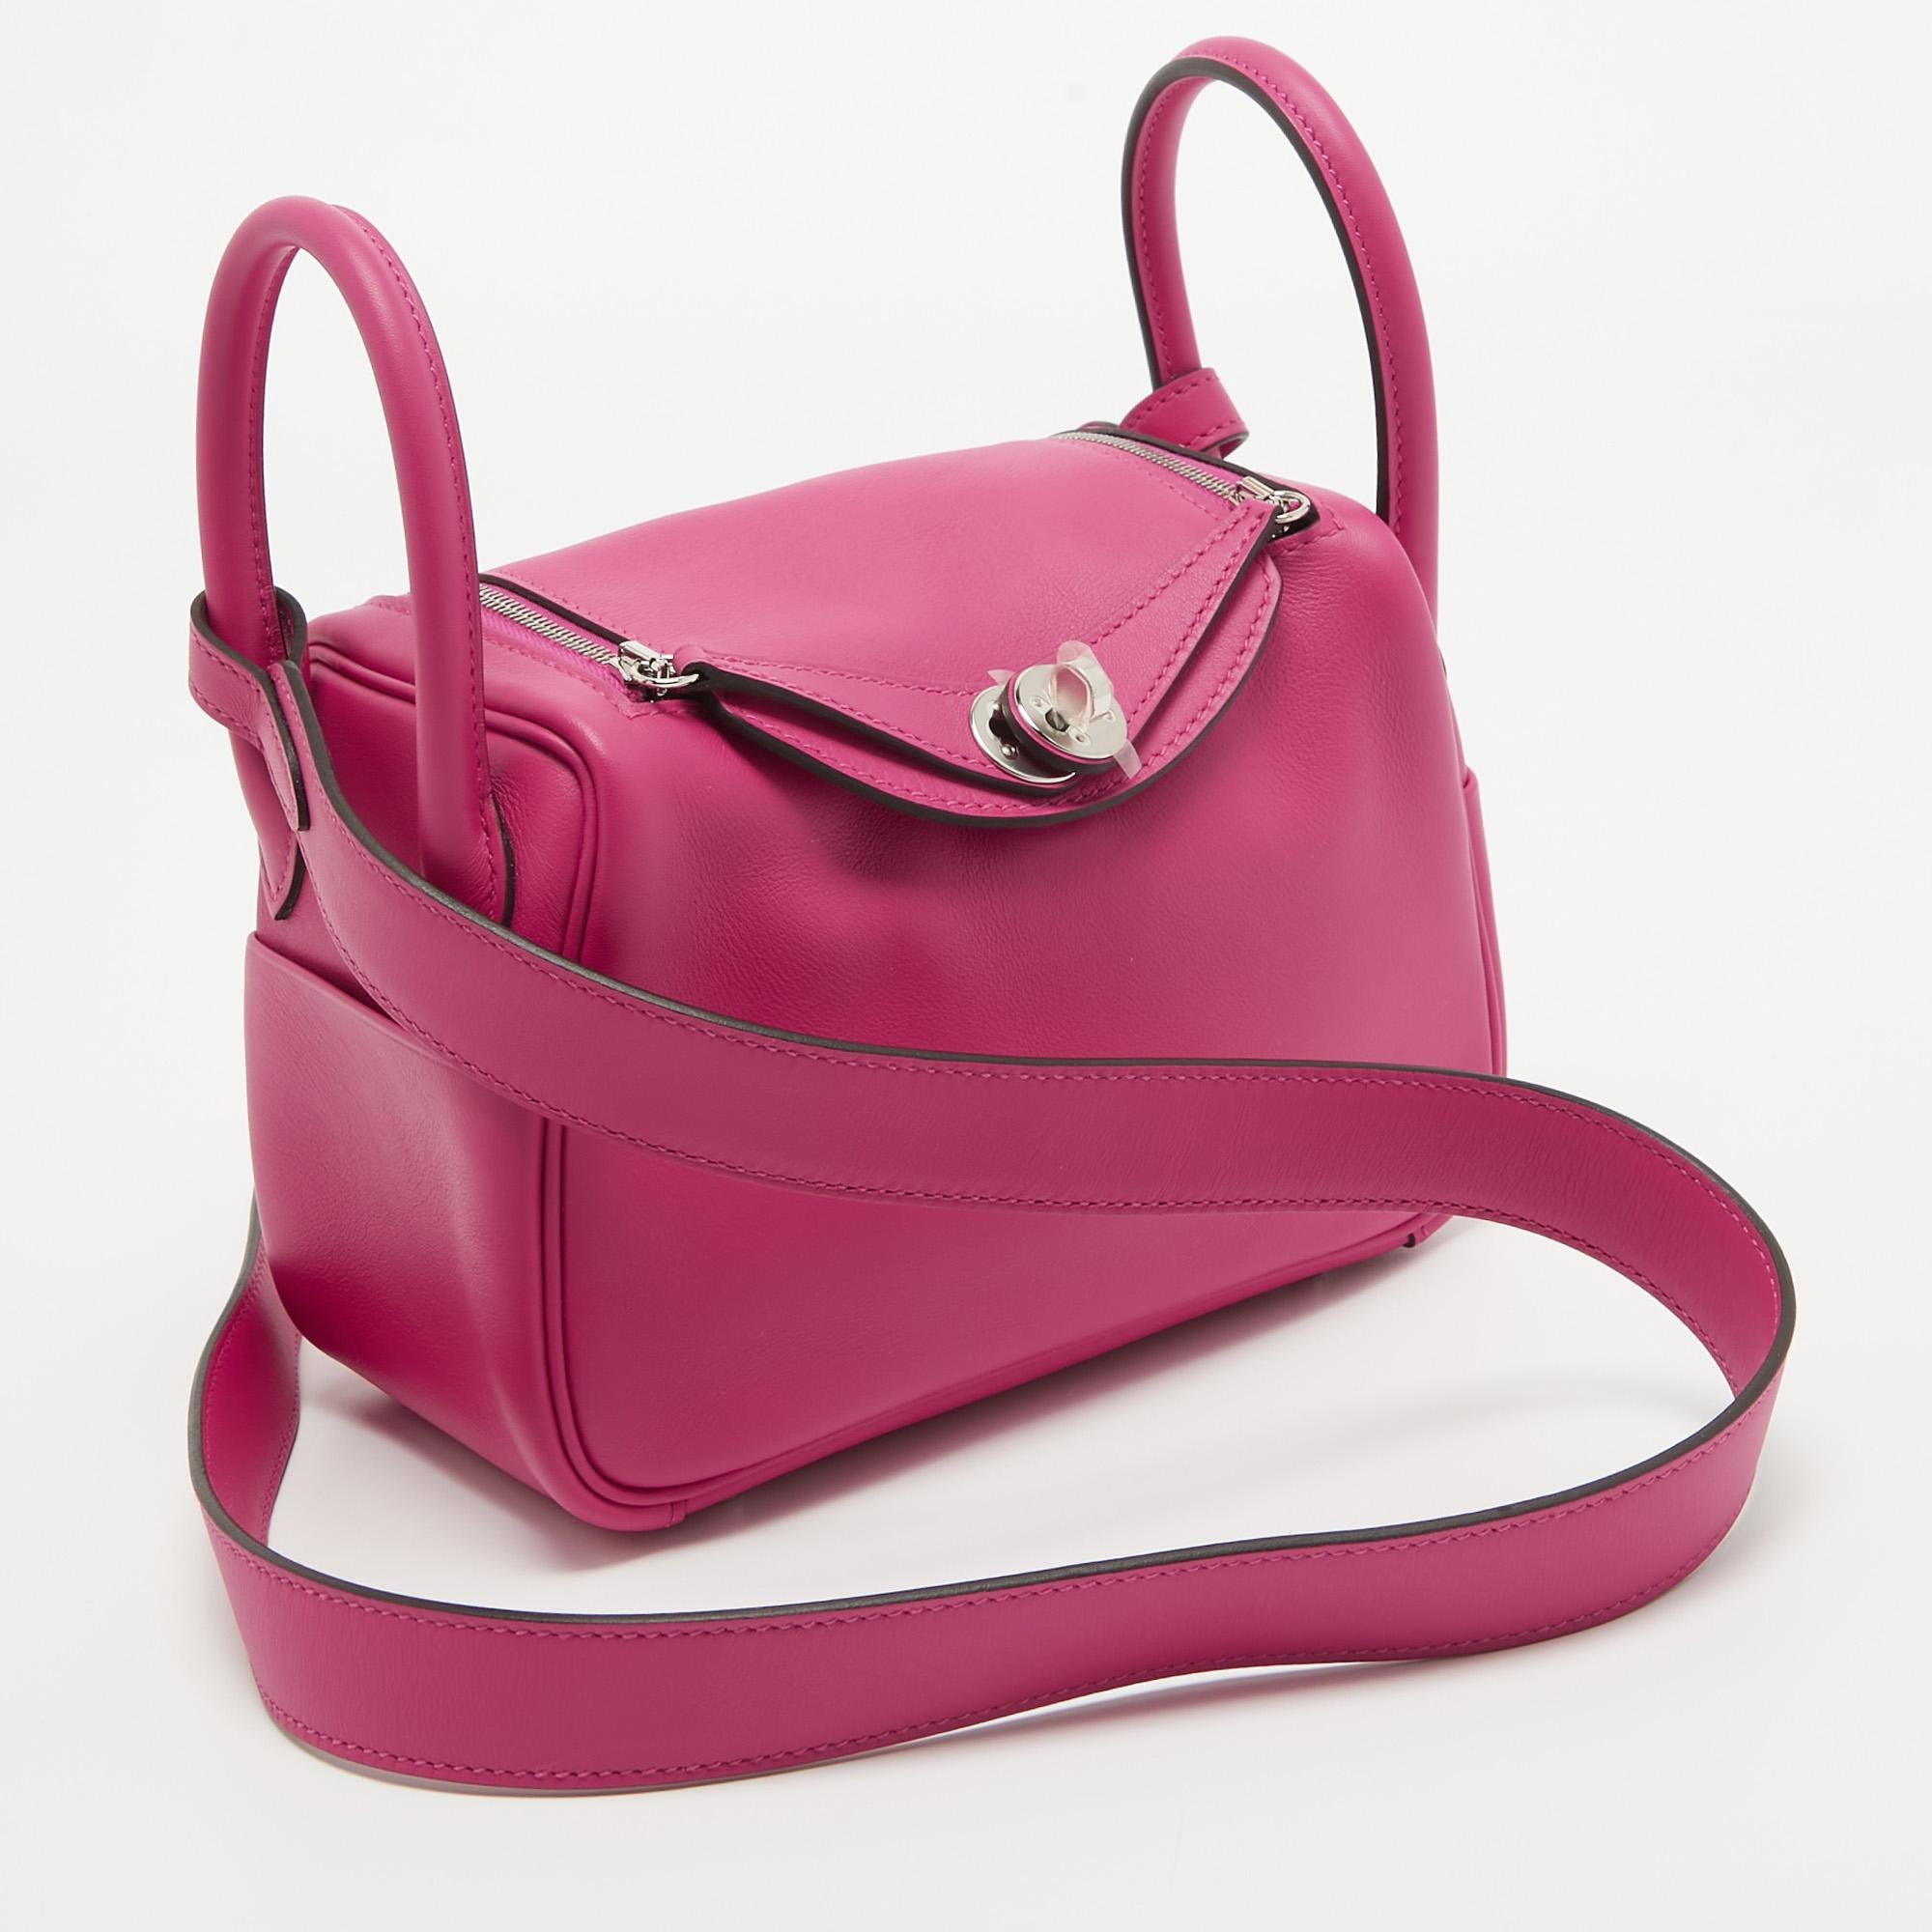 The Hermès Lindy was first designed in 2006 and it is recognized worldwide for its relaxed design. A creation of exemplary craftsmanship, the Lindy sweetly embodies ladylike elegance with a whimsical touch! Exquisitely crafted from leather, the bag